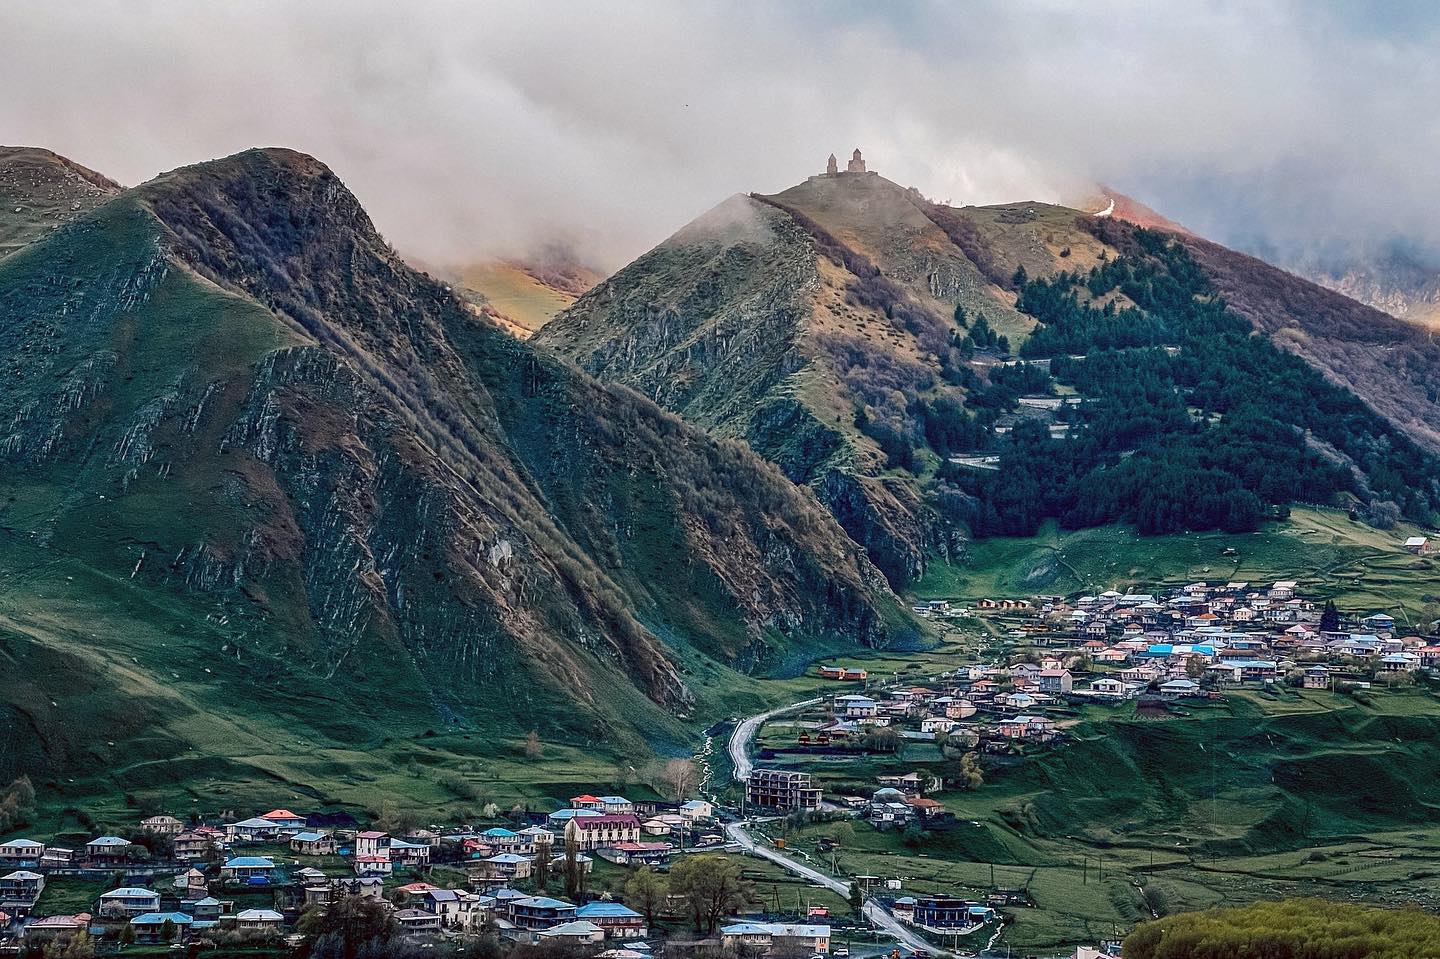 Stunning view from my hotel balcony of Kazbegi and Gergeti Church in the mountains of Georgia. It was a rainy afternoon but I managed to get some amazing breaks in the weather.